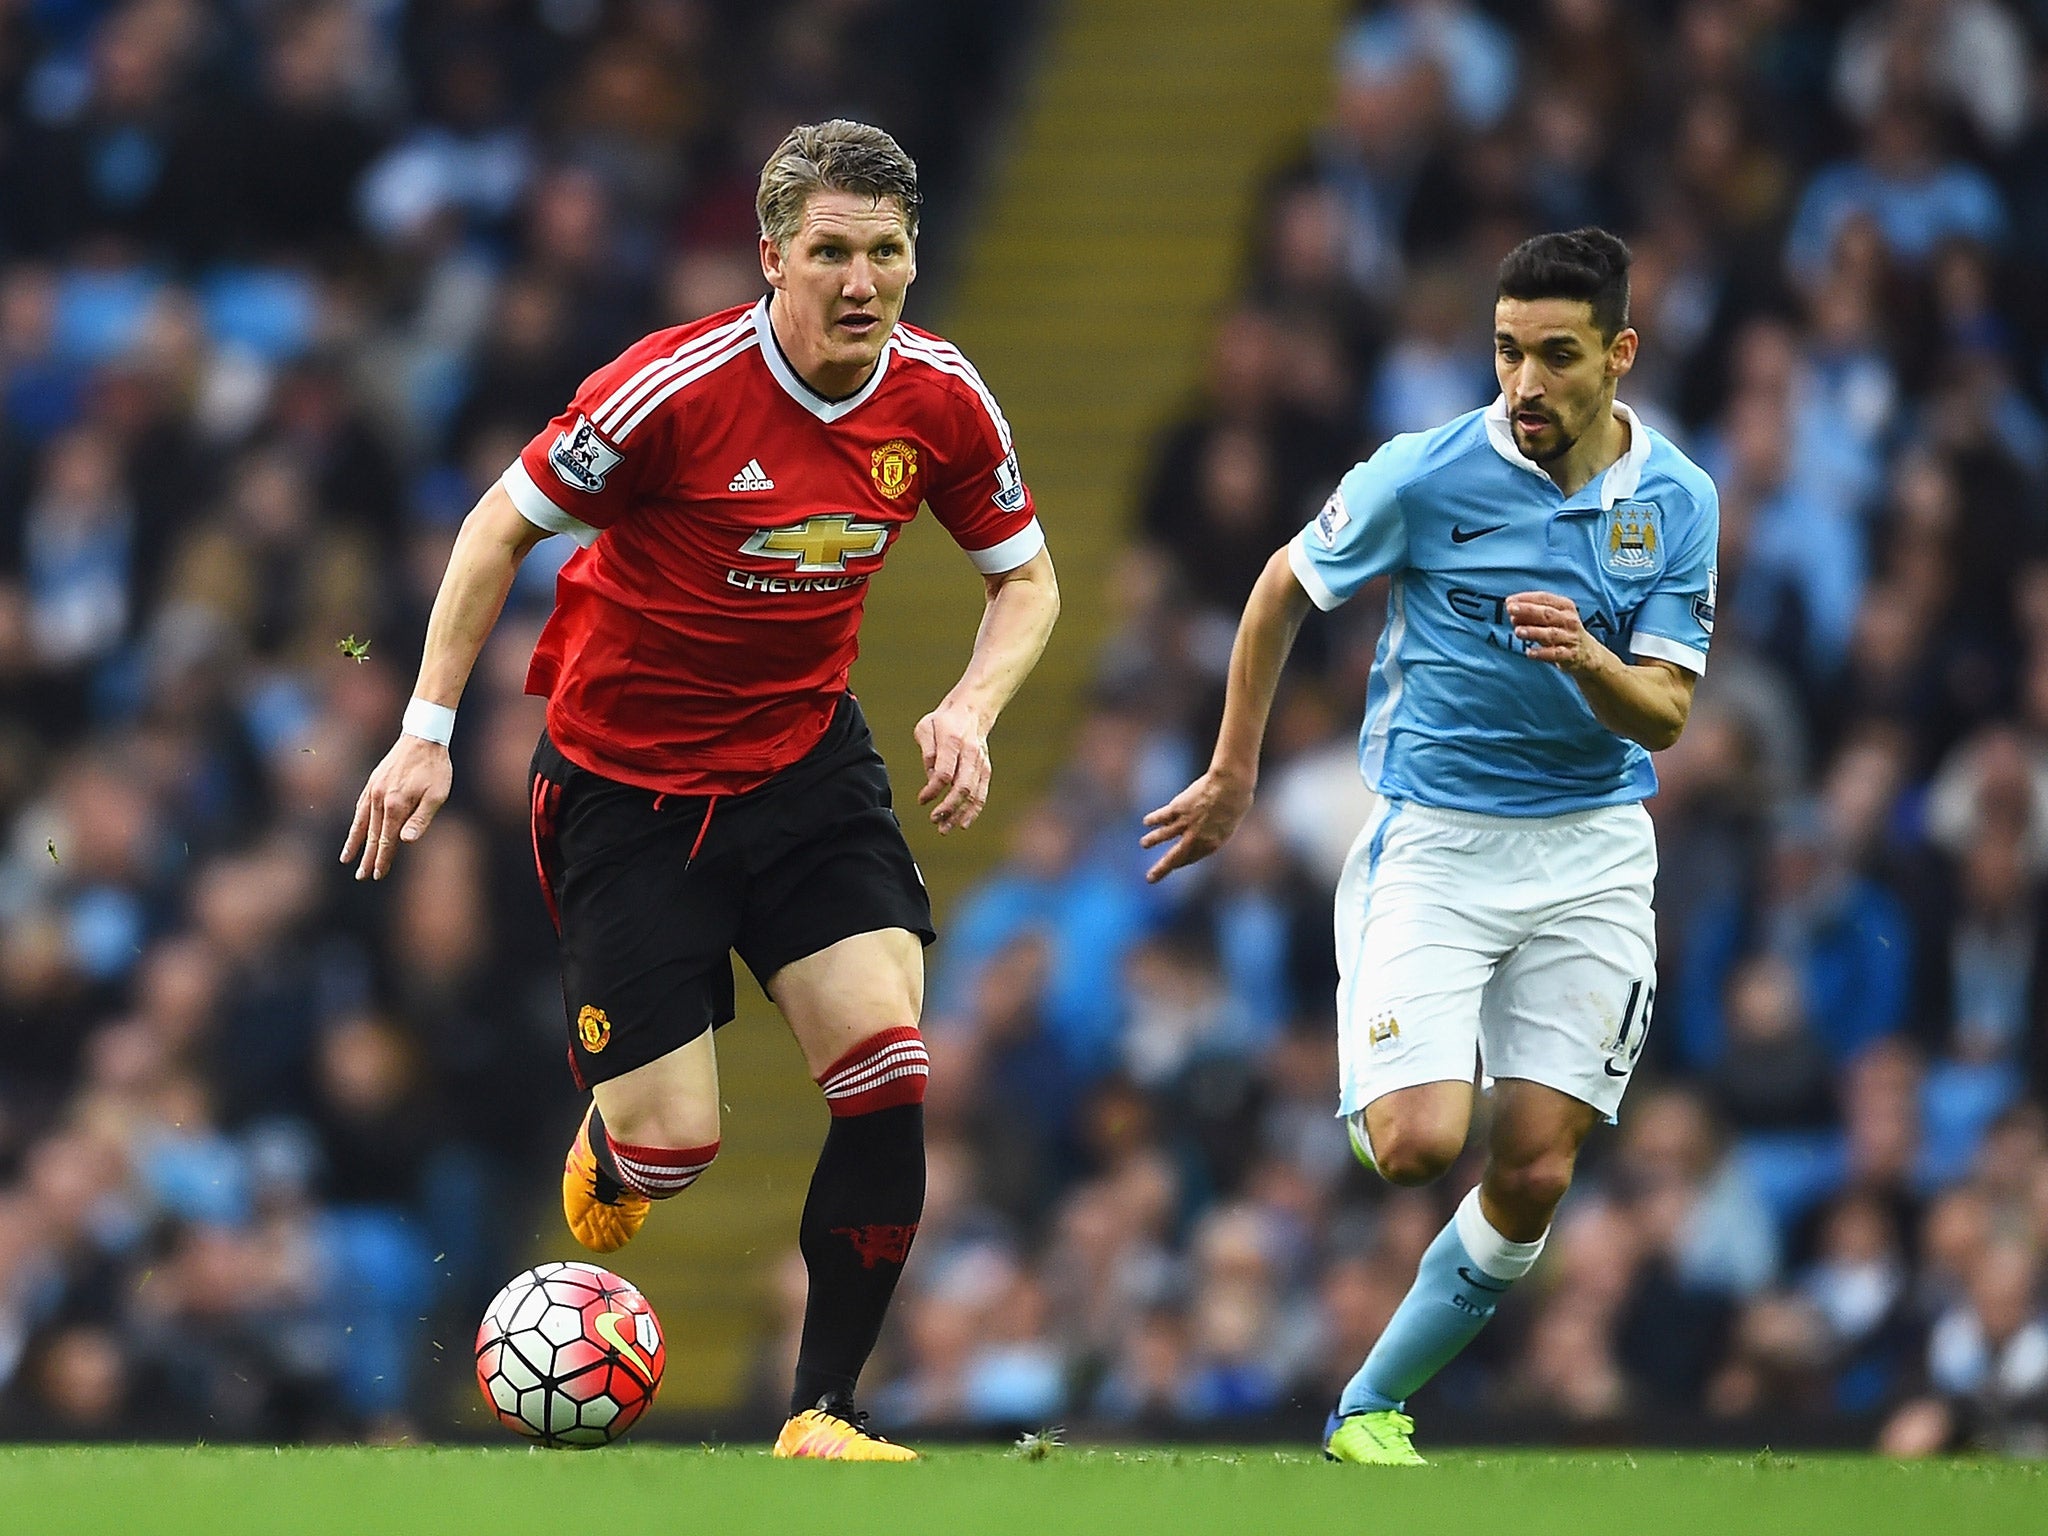 Bastian Schweinsteiger could leave Manchester United this summer